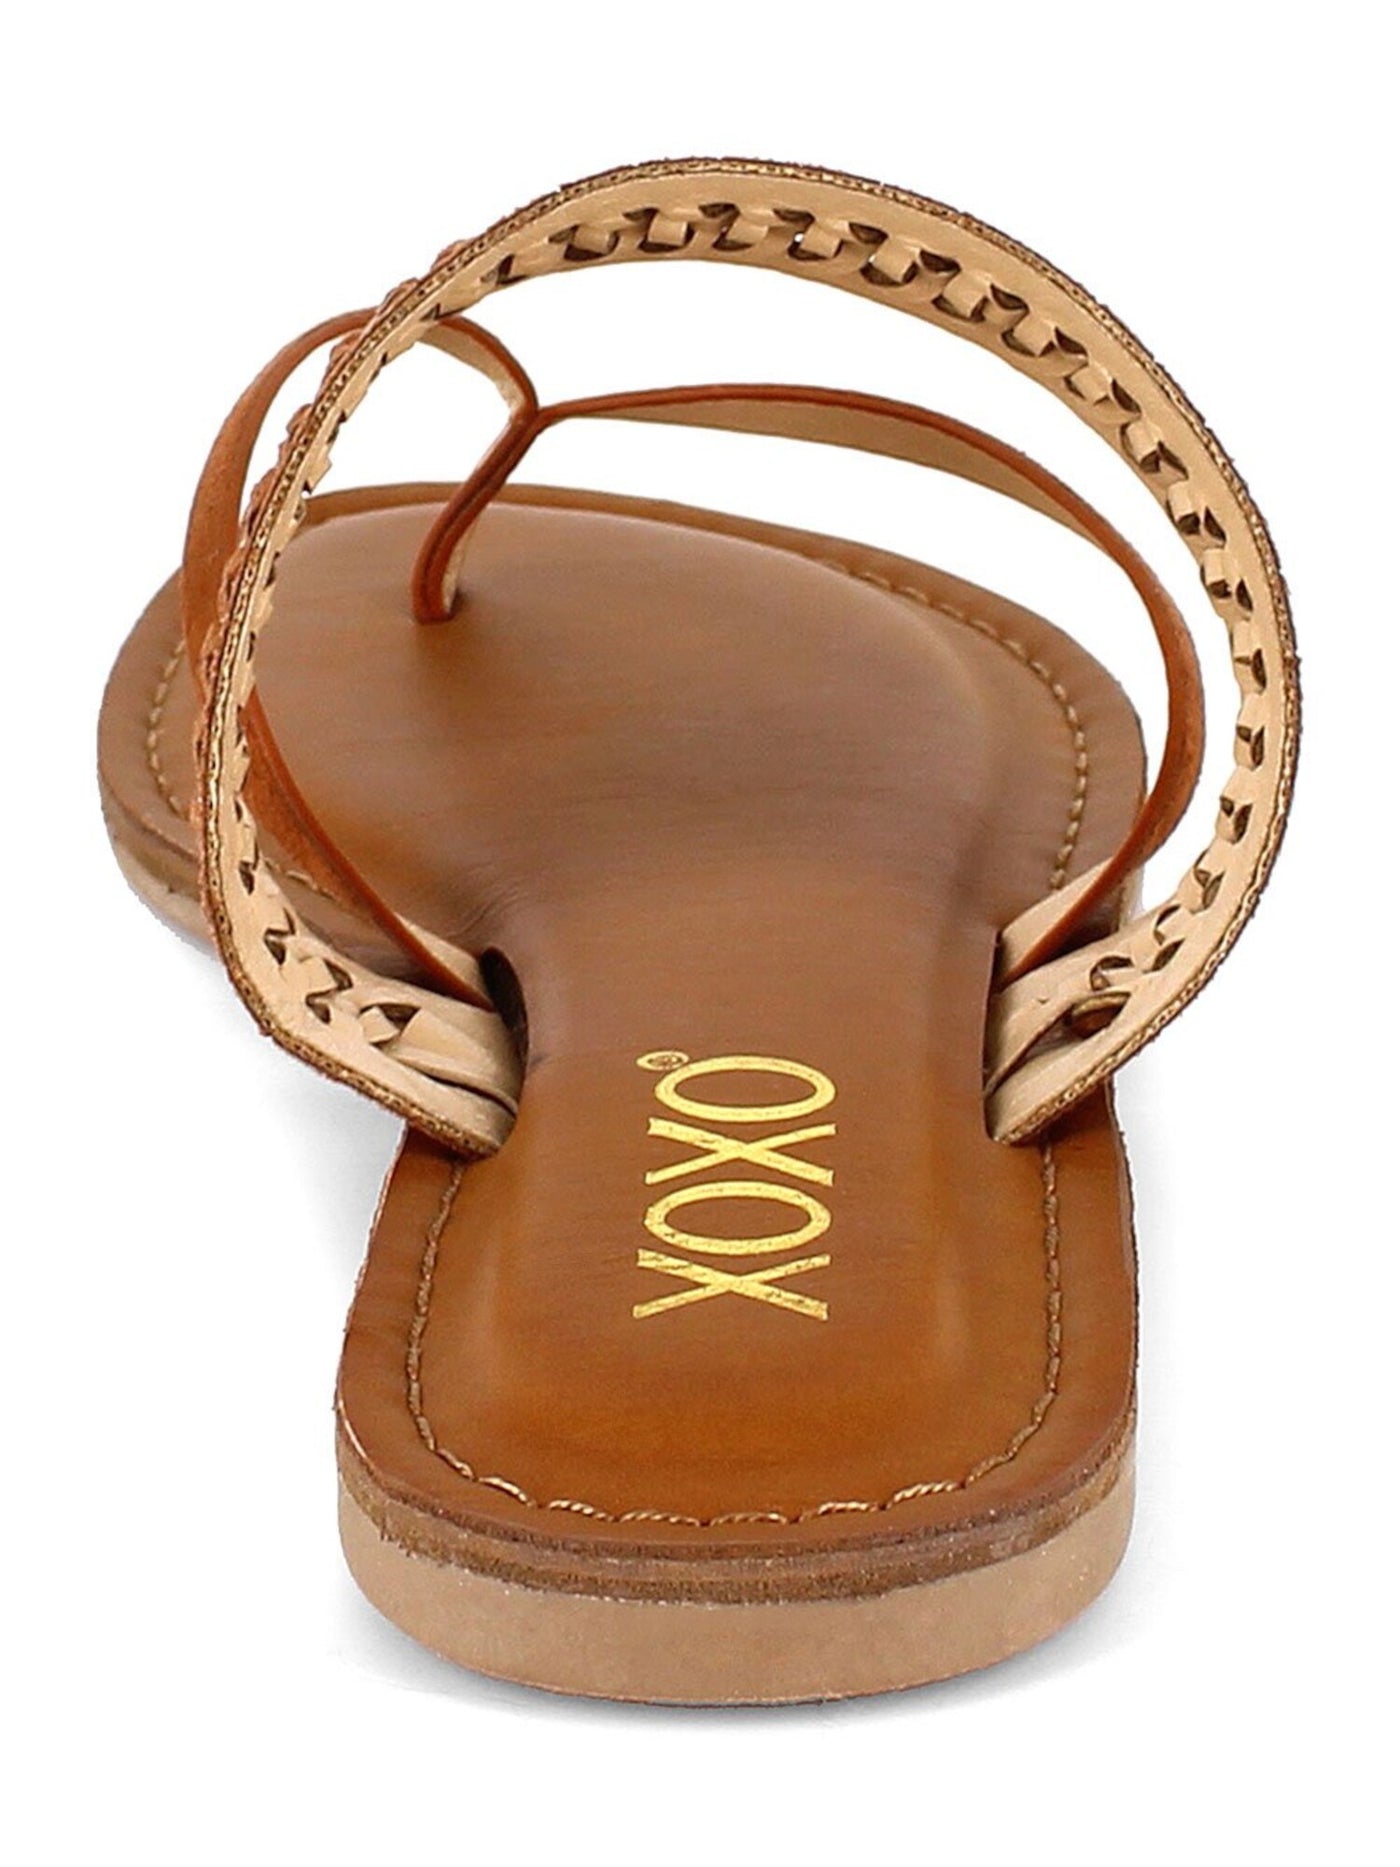 XOXO Womens Brown Woven Robby Round Toe Slip On Thong Sandals Shoes 5.5